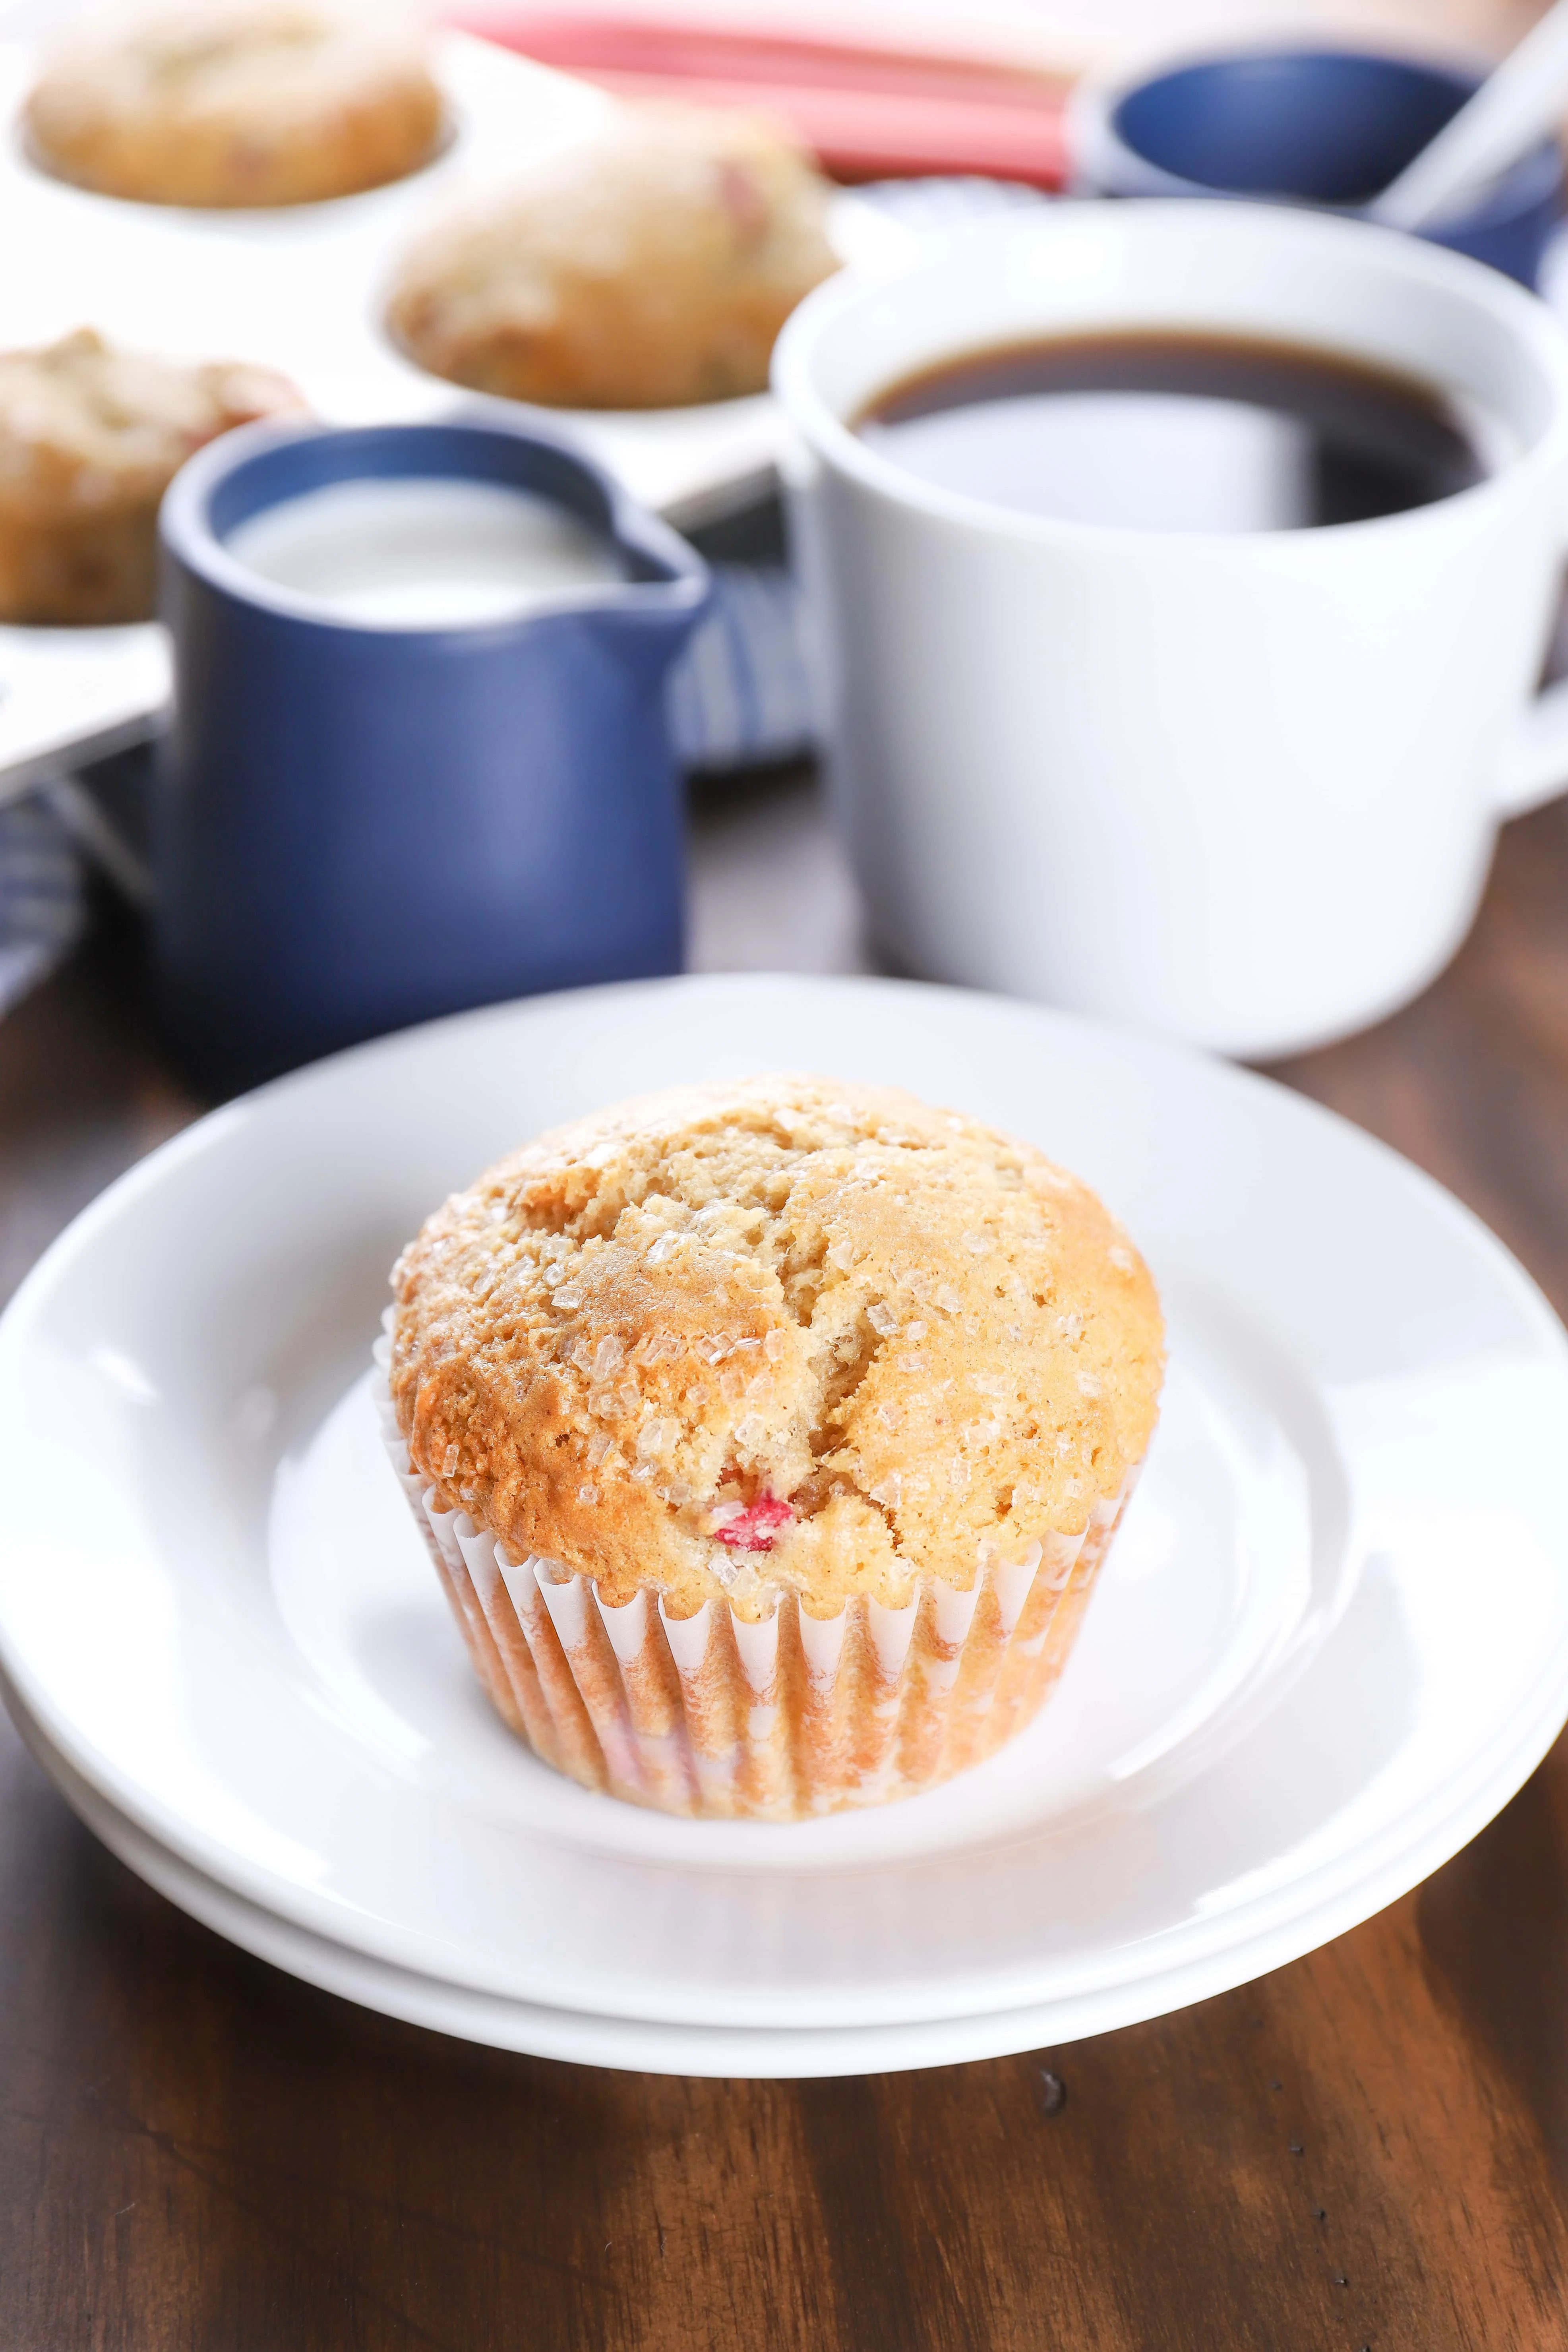 A bakery style rhubarb muffin on a plate with a cup of coffee. Recipe from A Kitchen Addiction